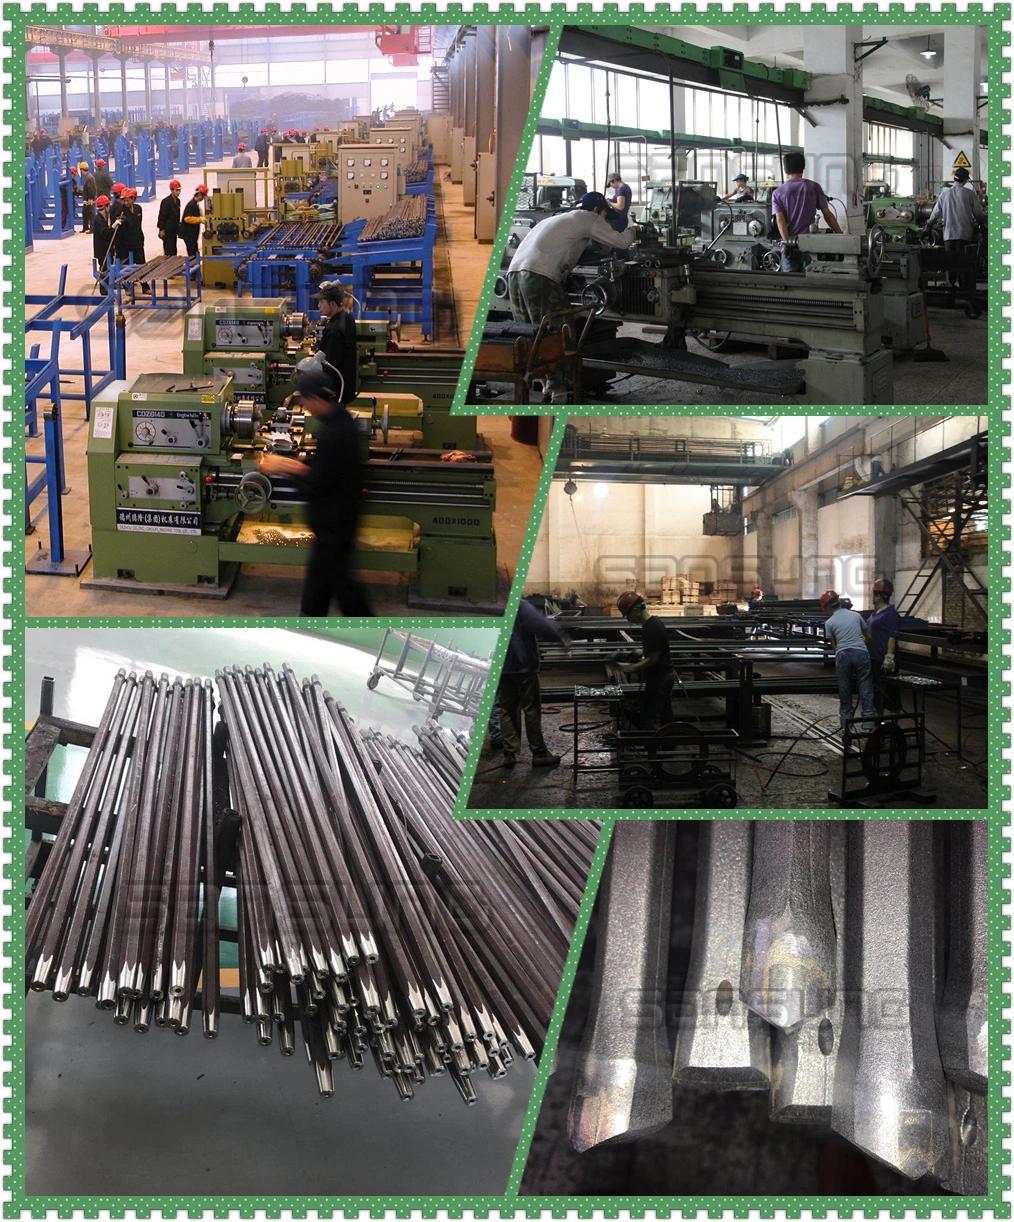 Rock Drill Stone Quarrying Integral Steel Rods